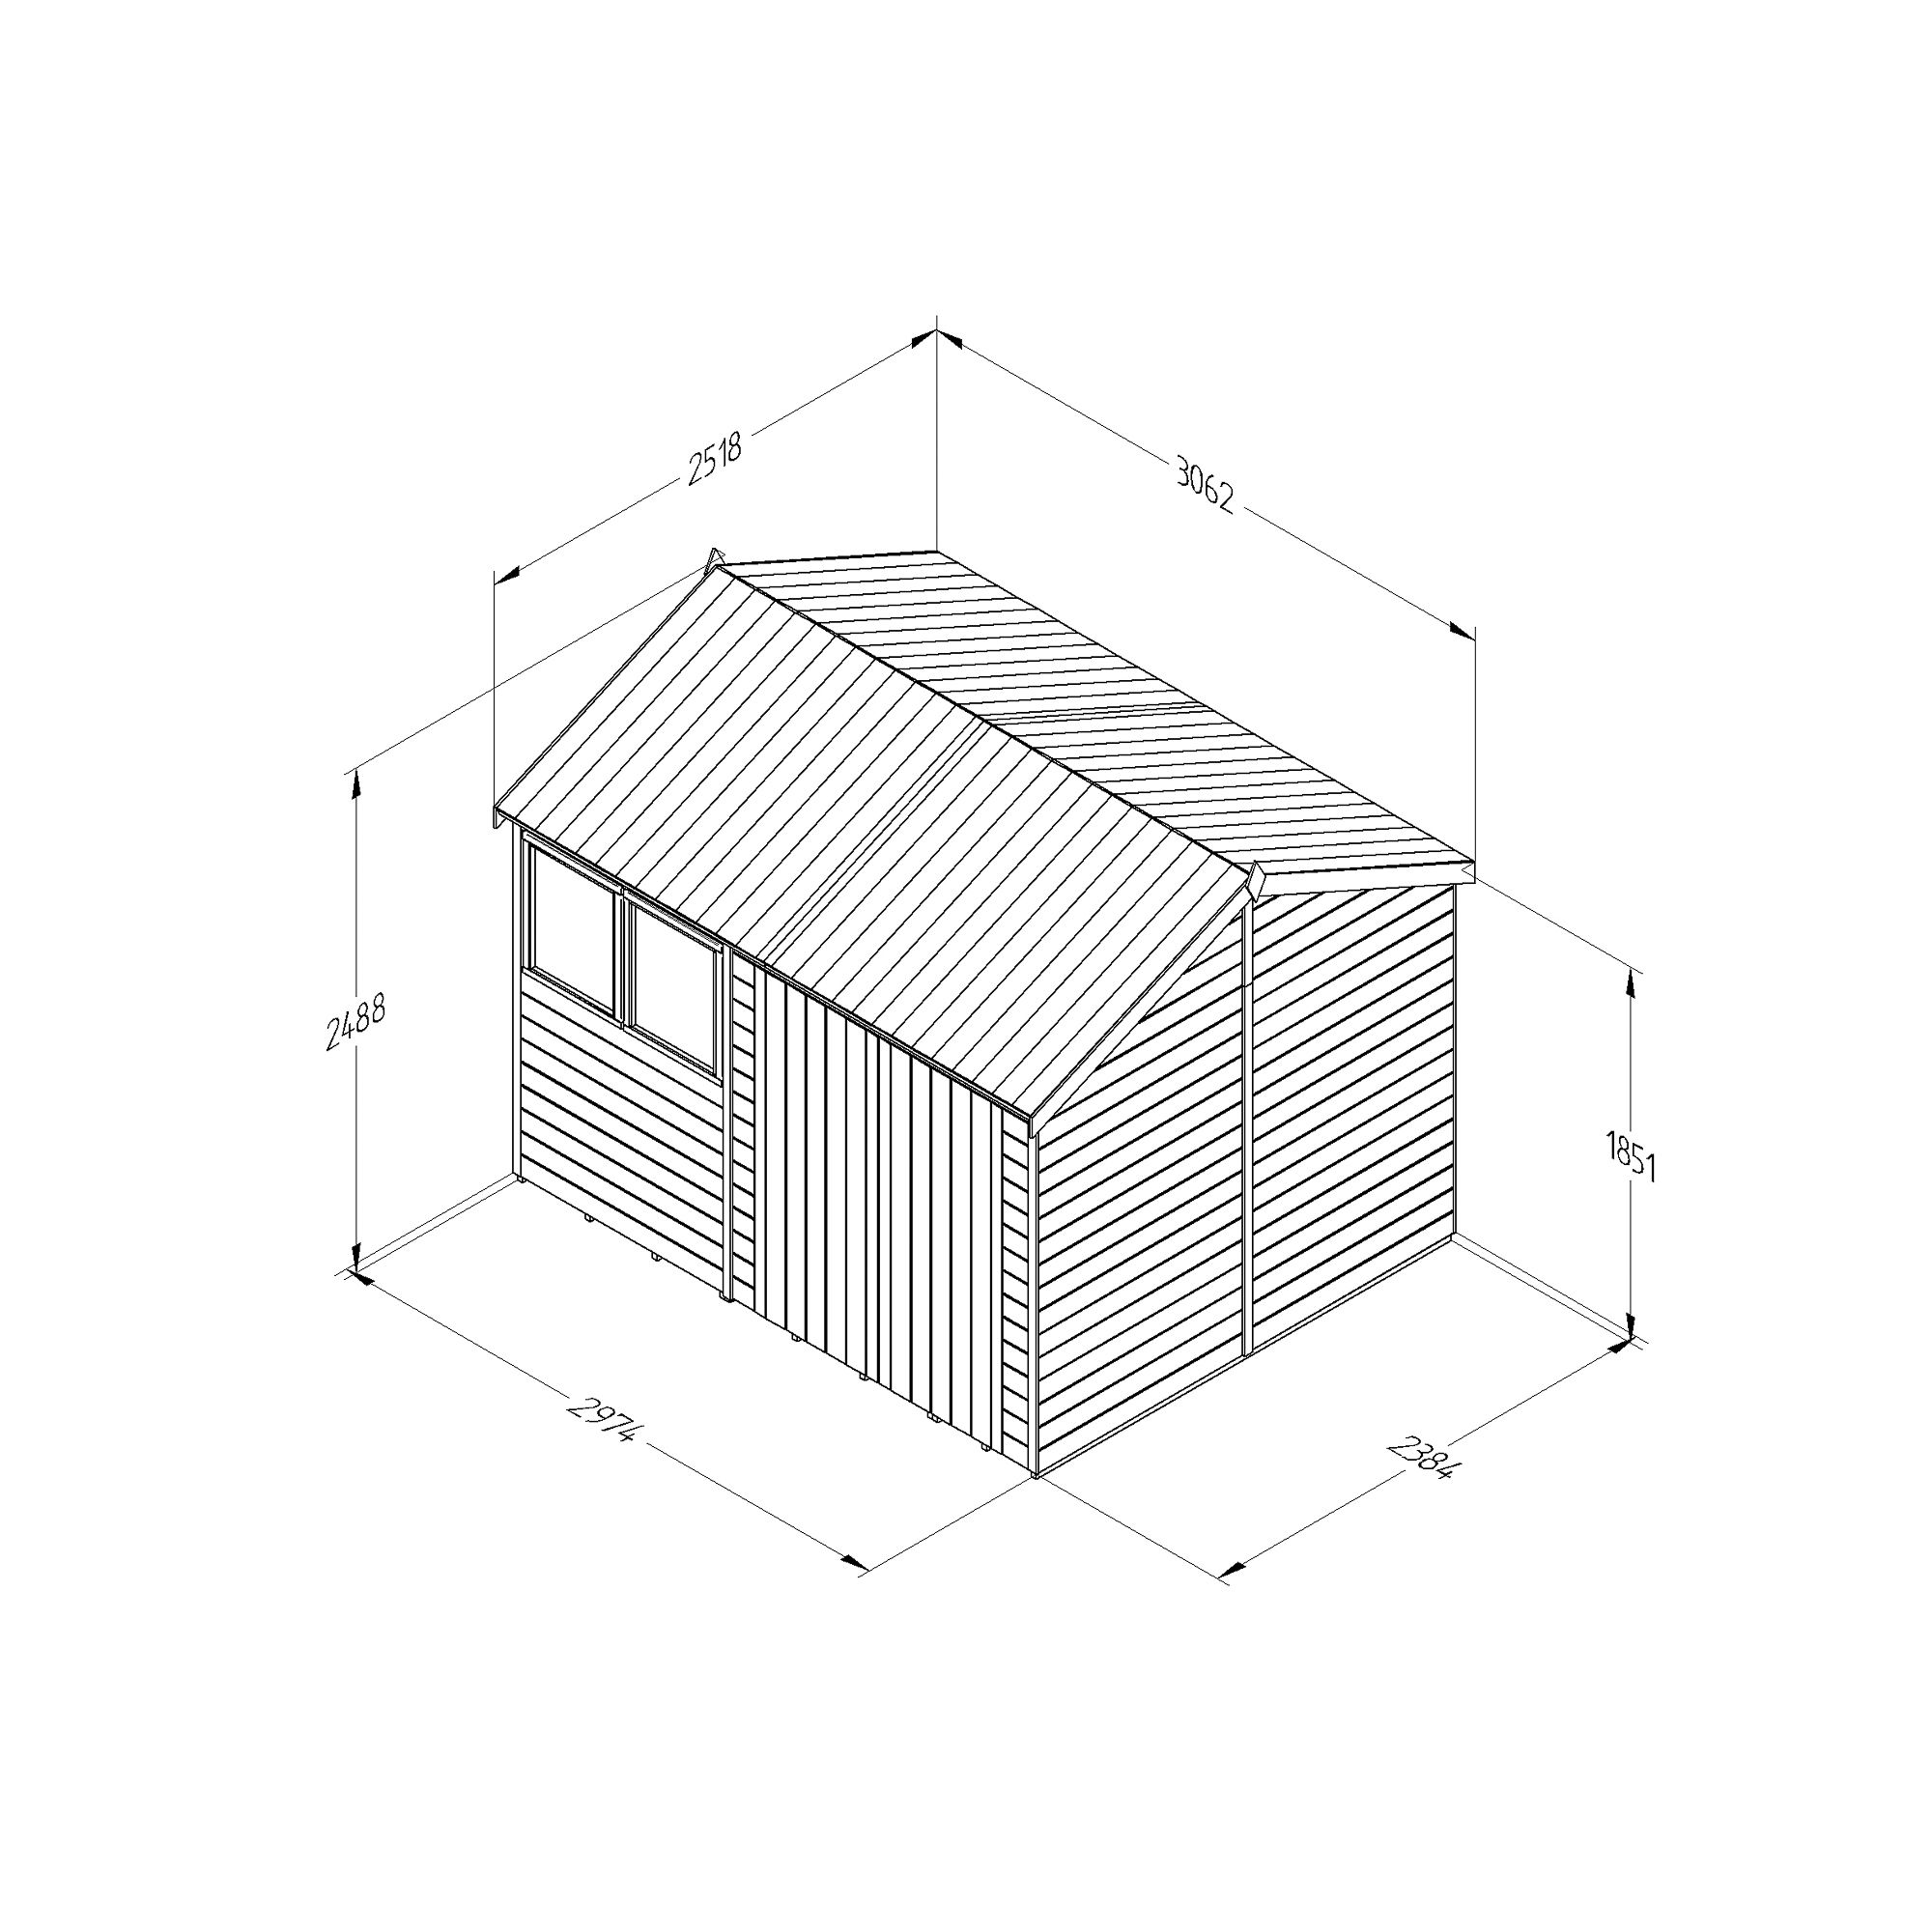 Forest Garden Timberdale 10x8 ft Reverse apex Wooden 2 door Shed with floor (Base included) - Assembly service included